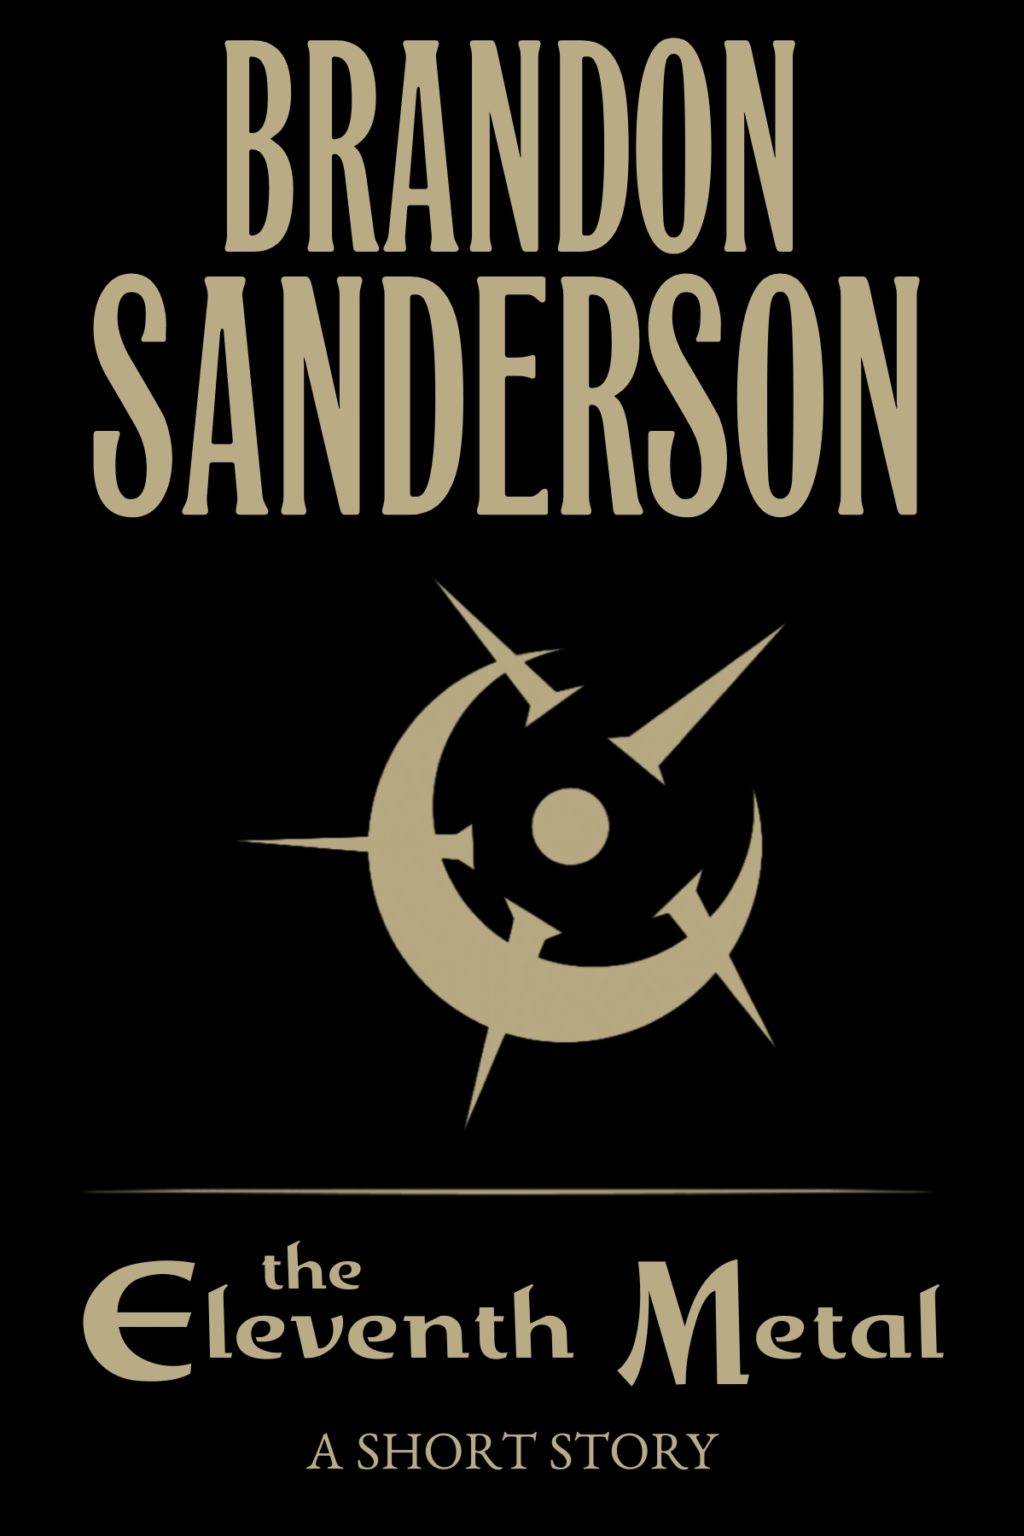 how many brandon sanderson books are there